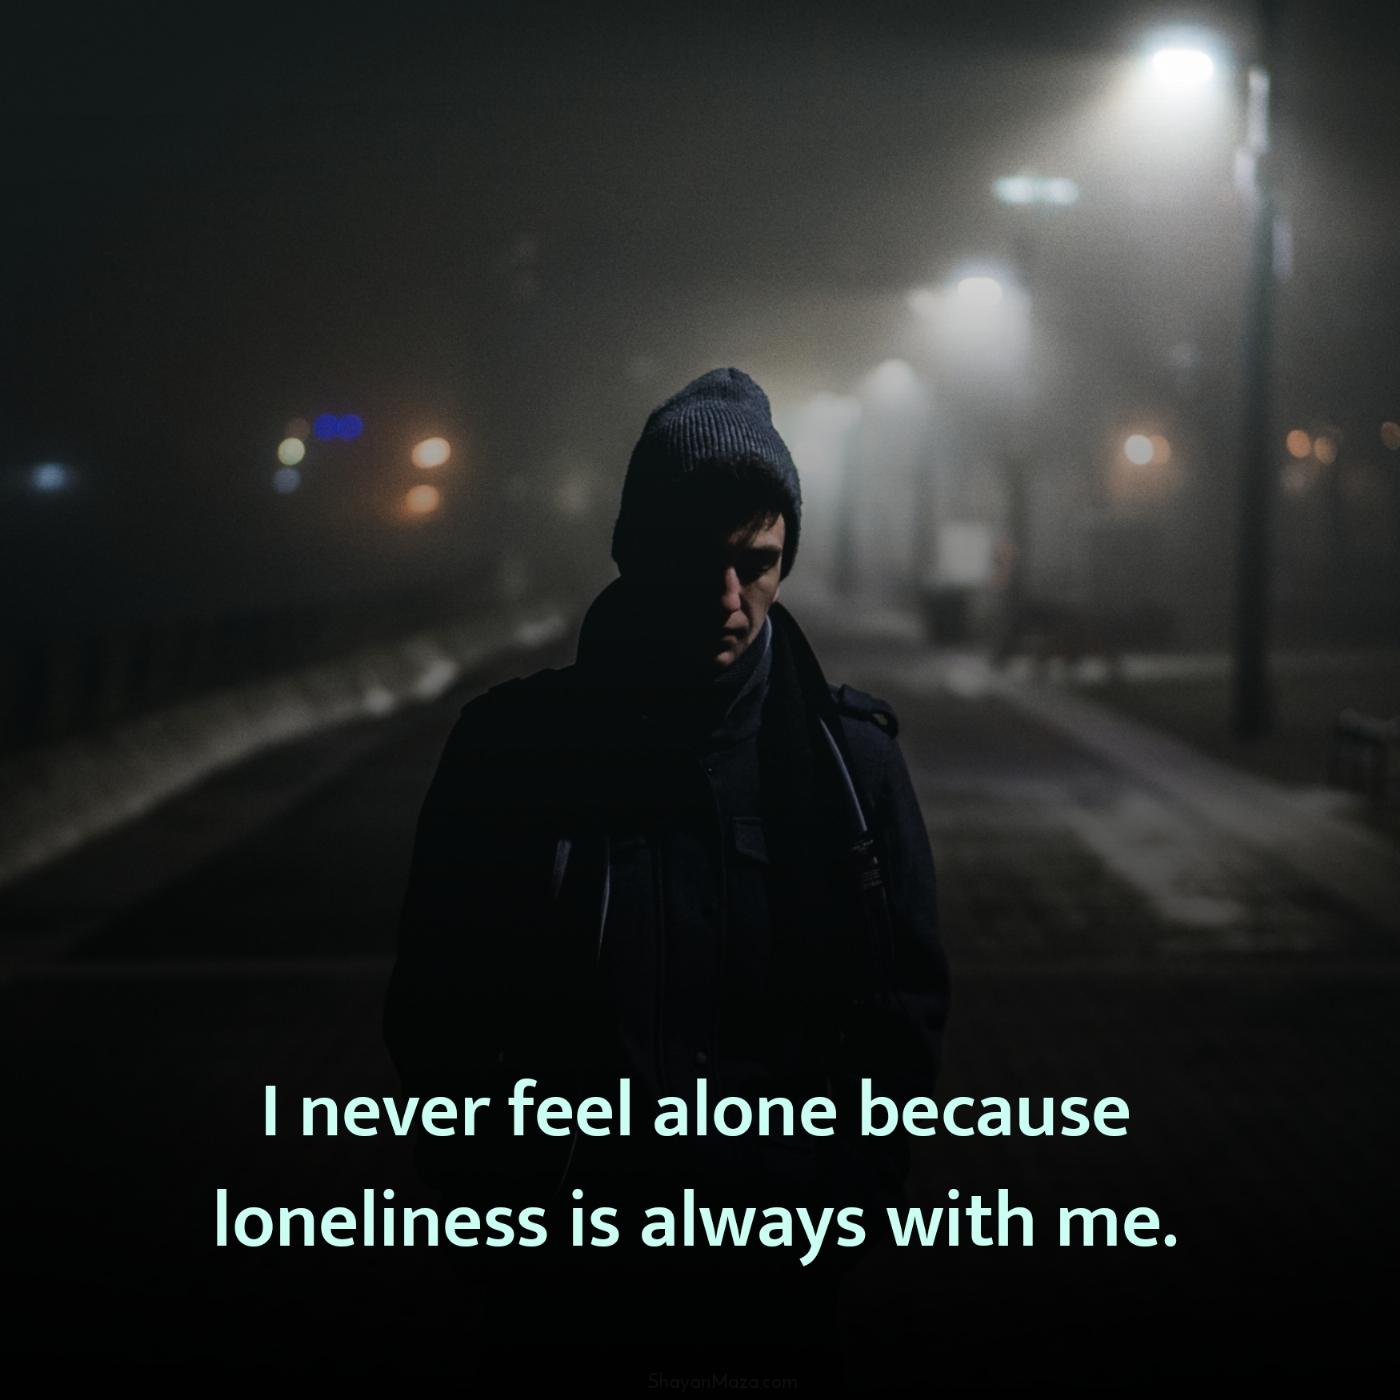 I never feel alone because loneliness is always with me